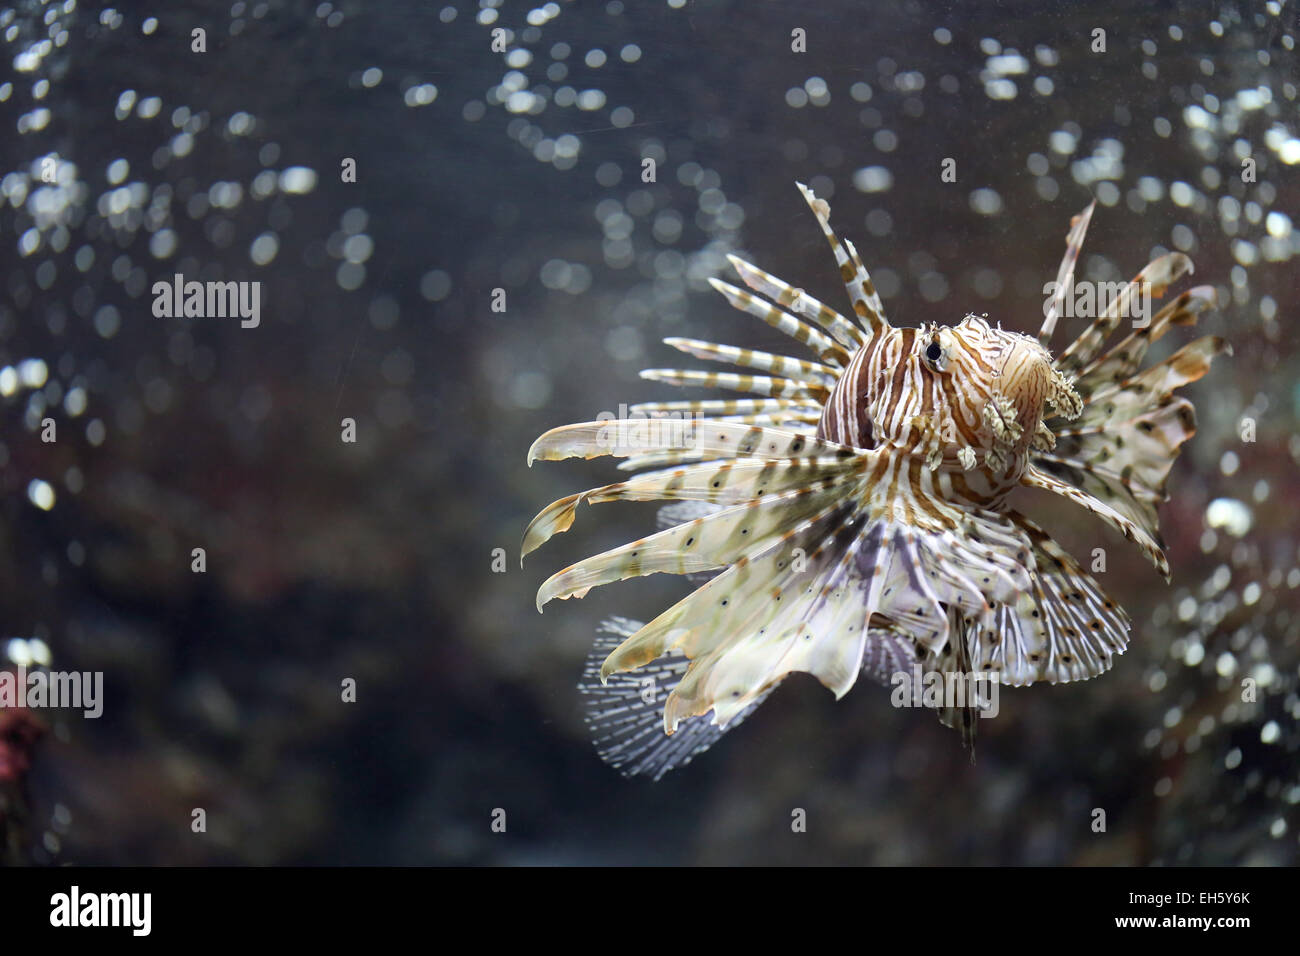 Focus the Lionfish and dangerous fish in the sea. Stock Photo